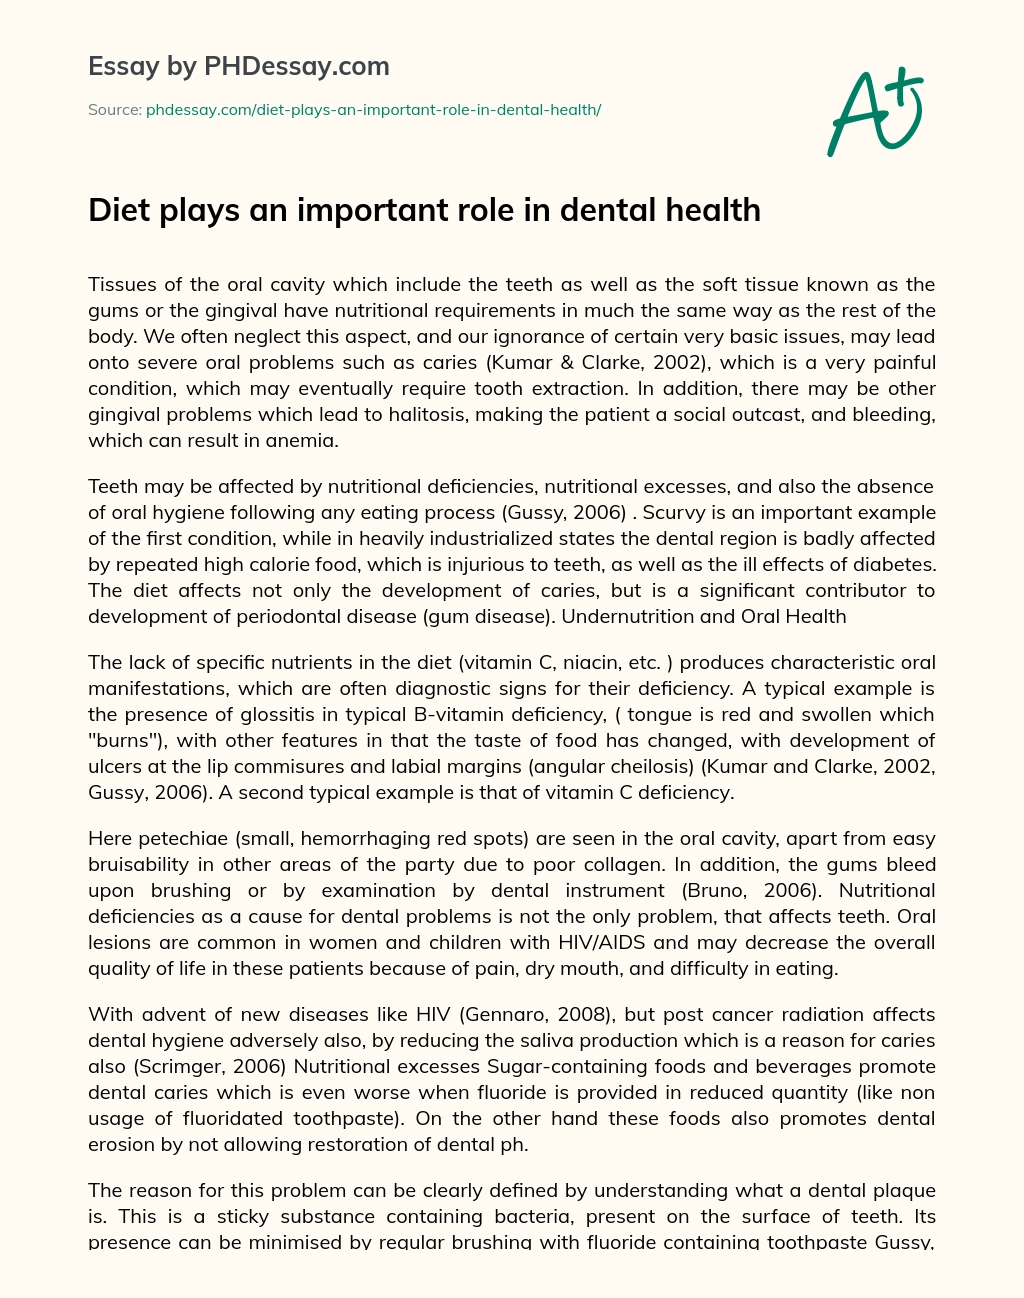 Diet plays an important role in dental health essay